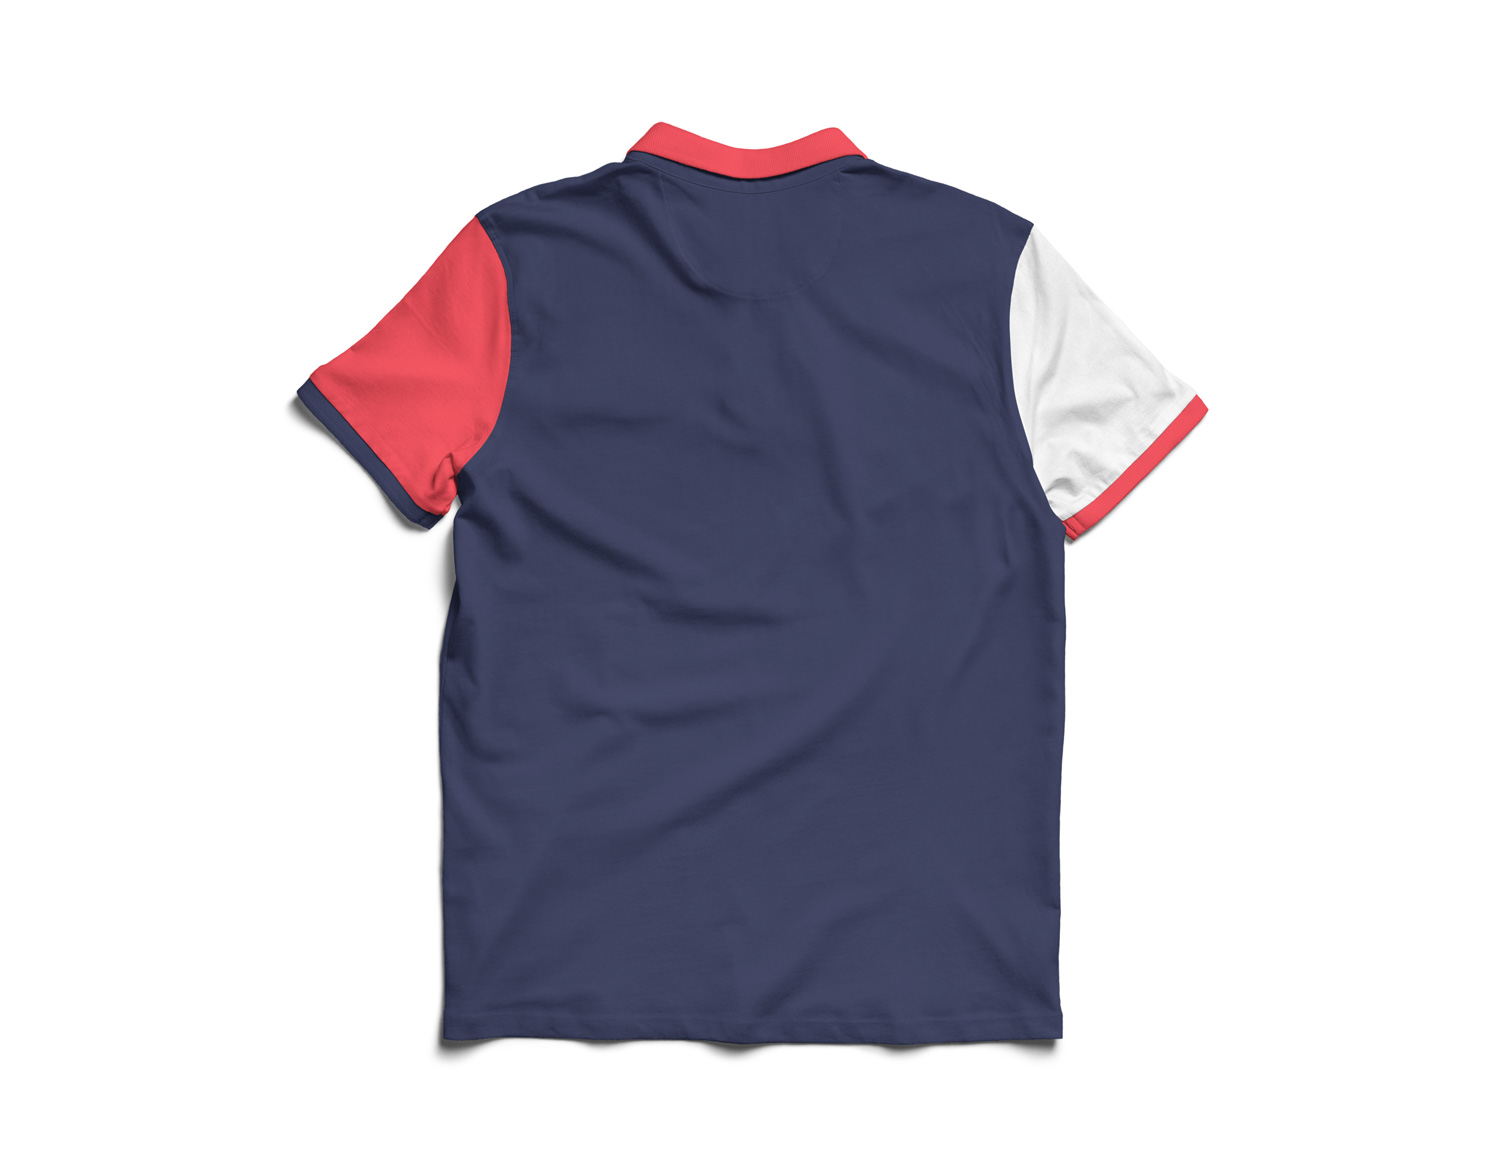 Download Free Polo Shirt Mockup Template Psd / Mens Casual Polo T ...